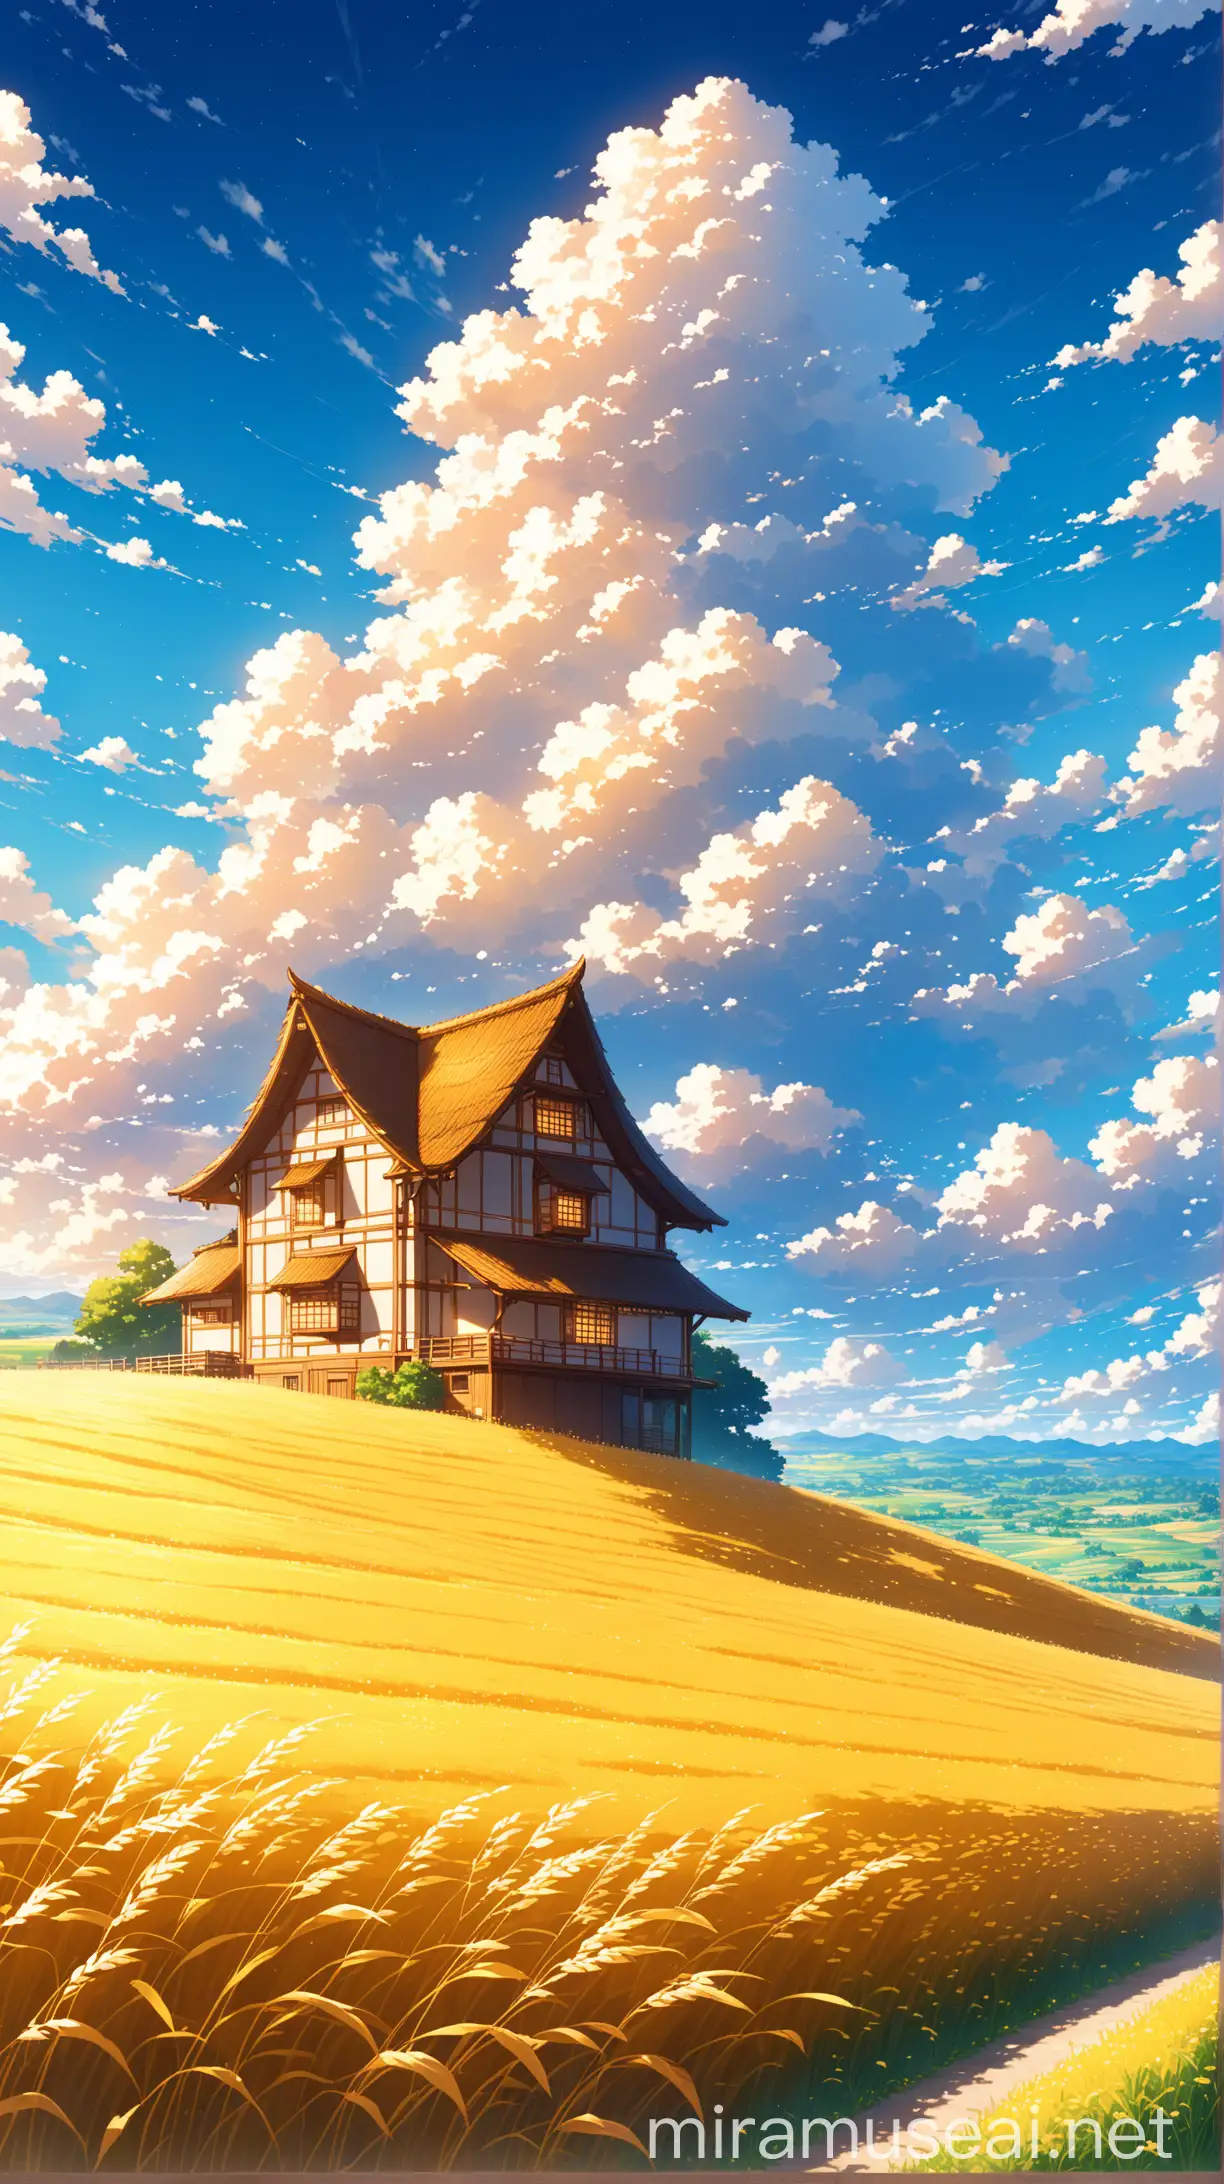 In a quaint title house, amidst fields of gold, where the breeze whispers secrets, yet untold, anime sky, cloud